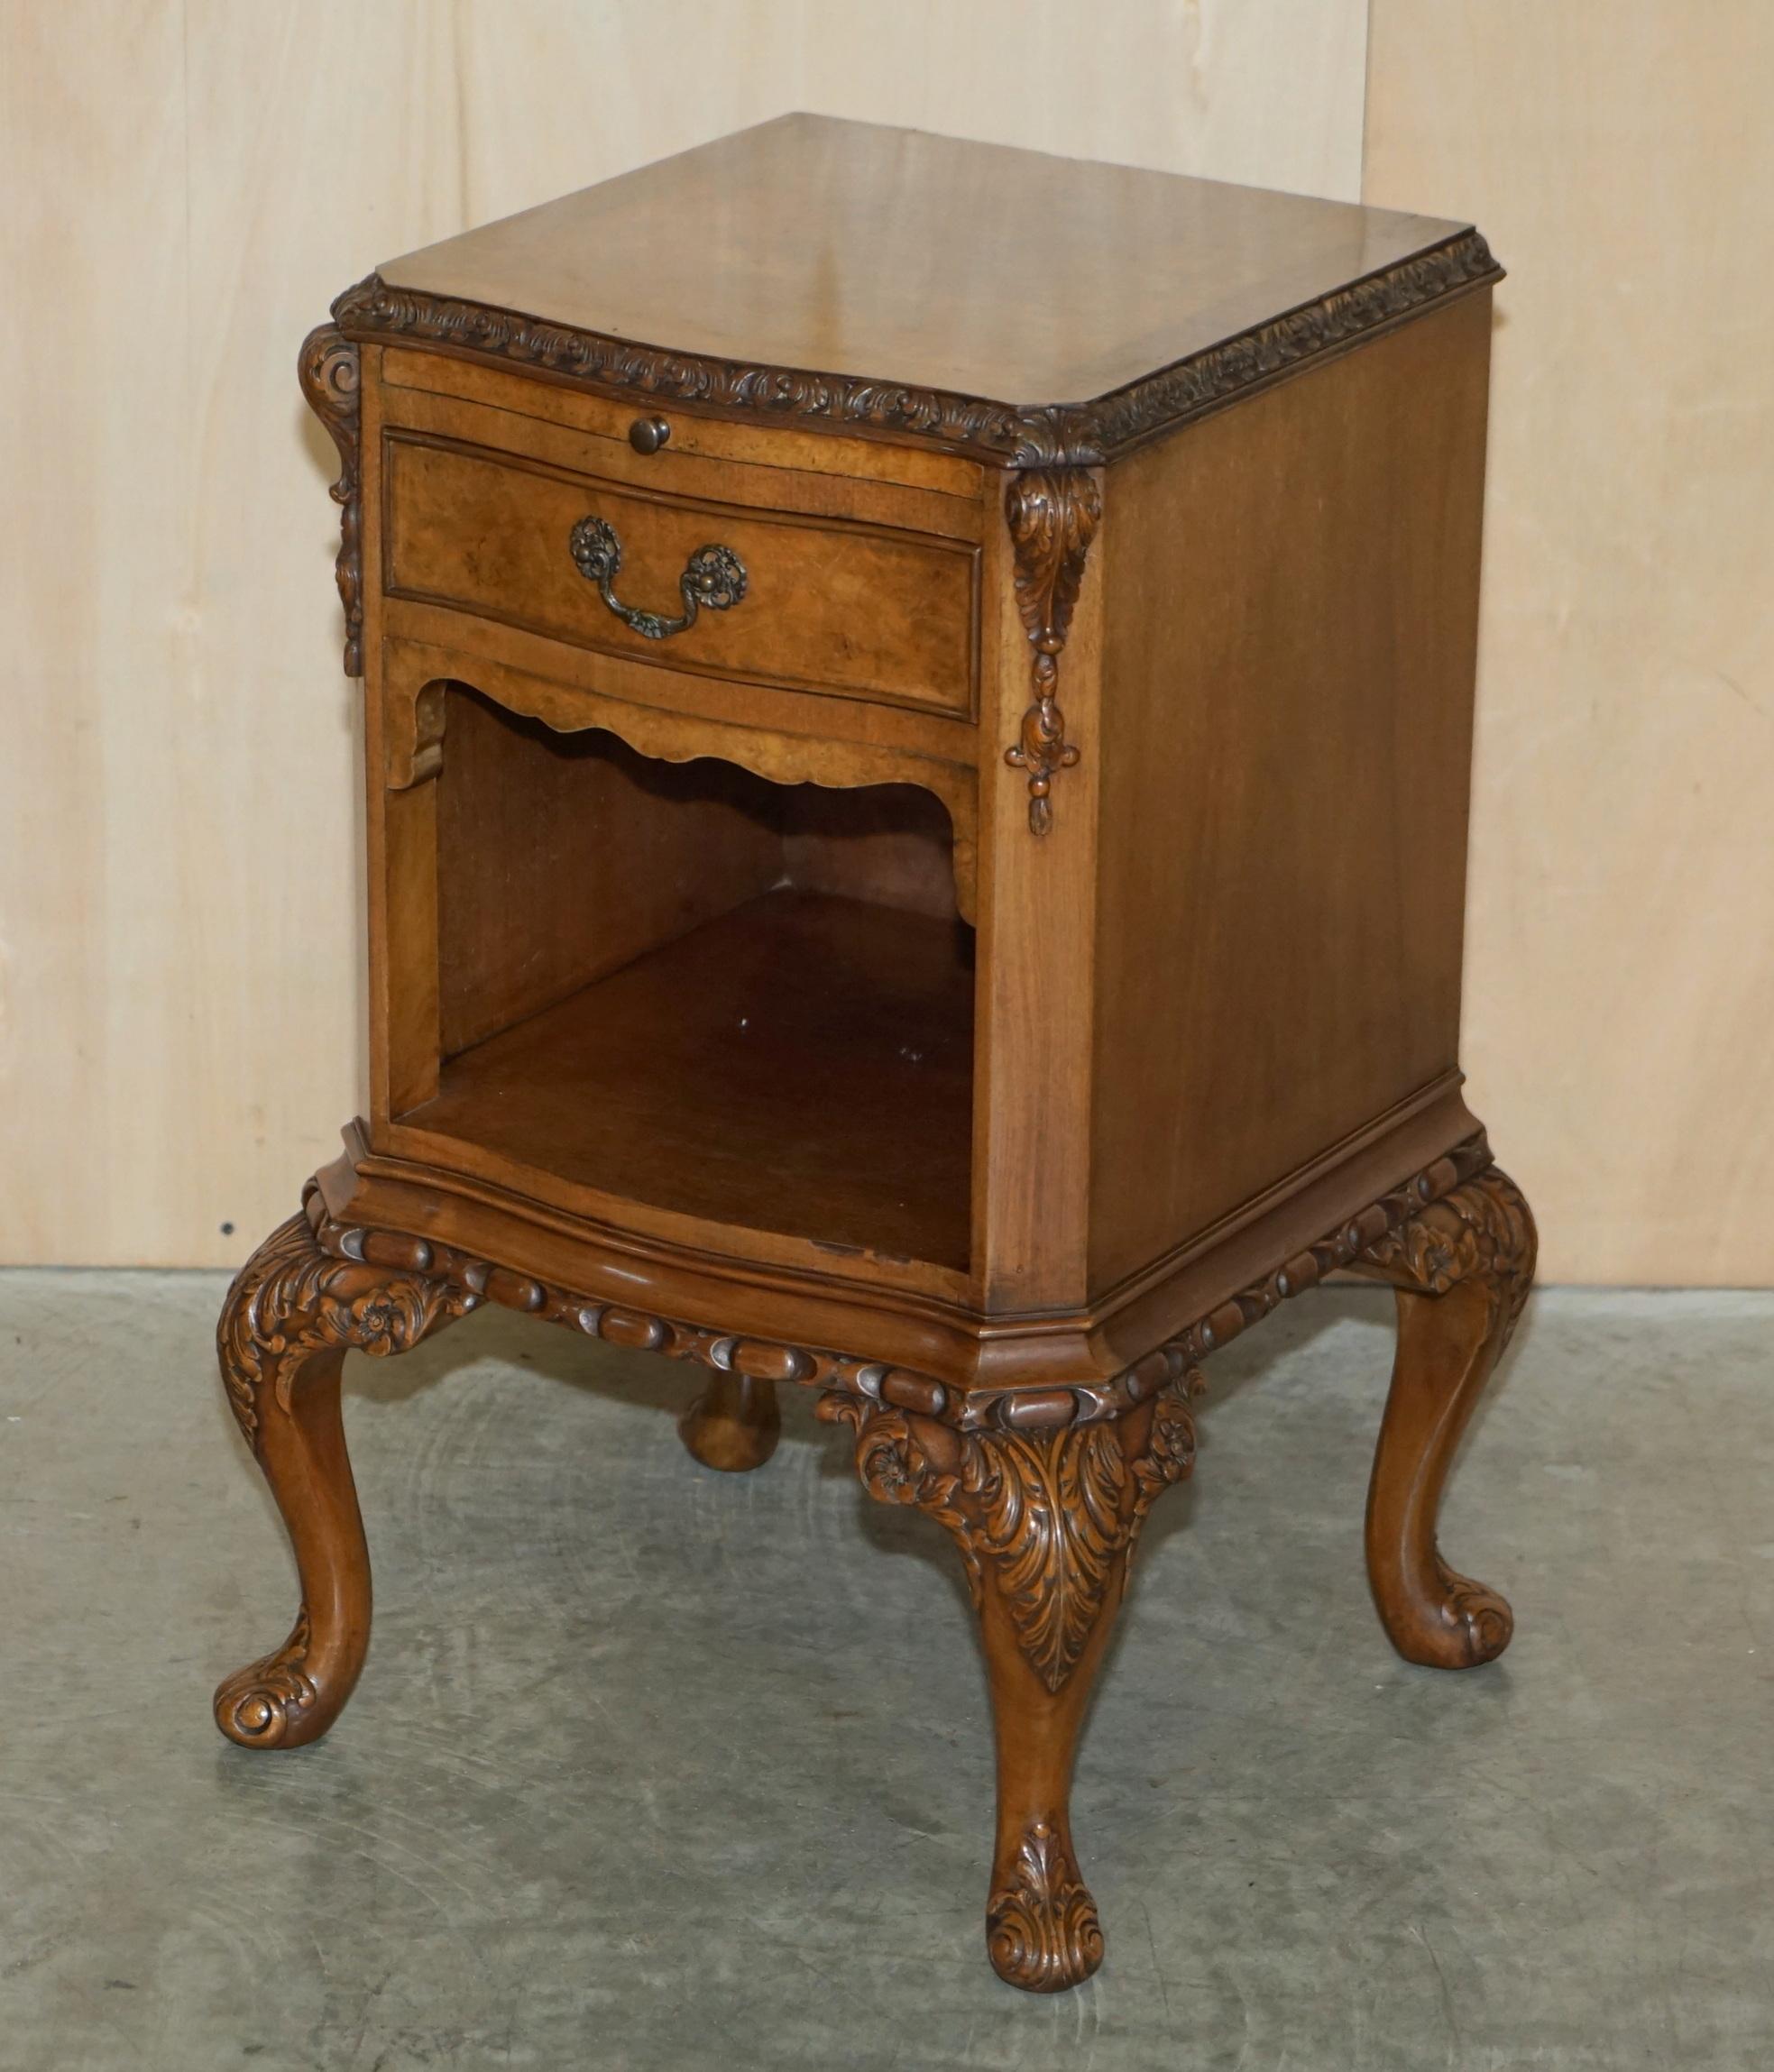 We are delighted to offer for sale this very fine pair of Maple & Co London Burr Walnut side tables with heavily carved cabriolet legs and mirrored top butlers slip serving trays, which are part of a large suite

This pair are part of a suite as